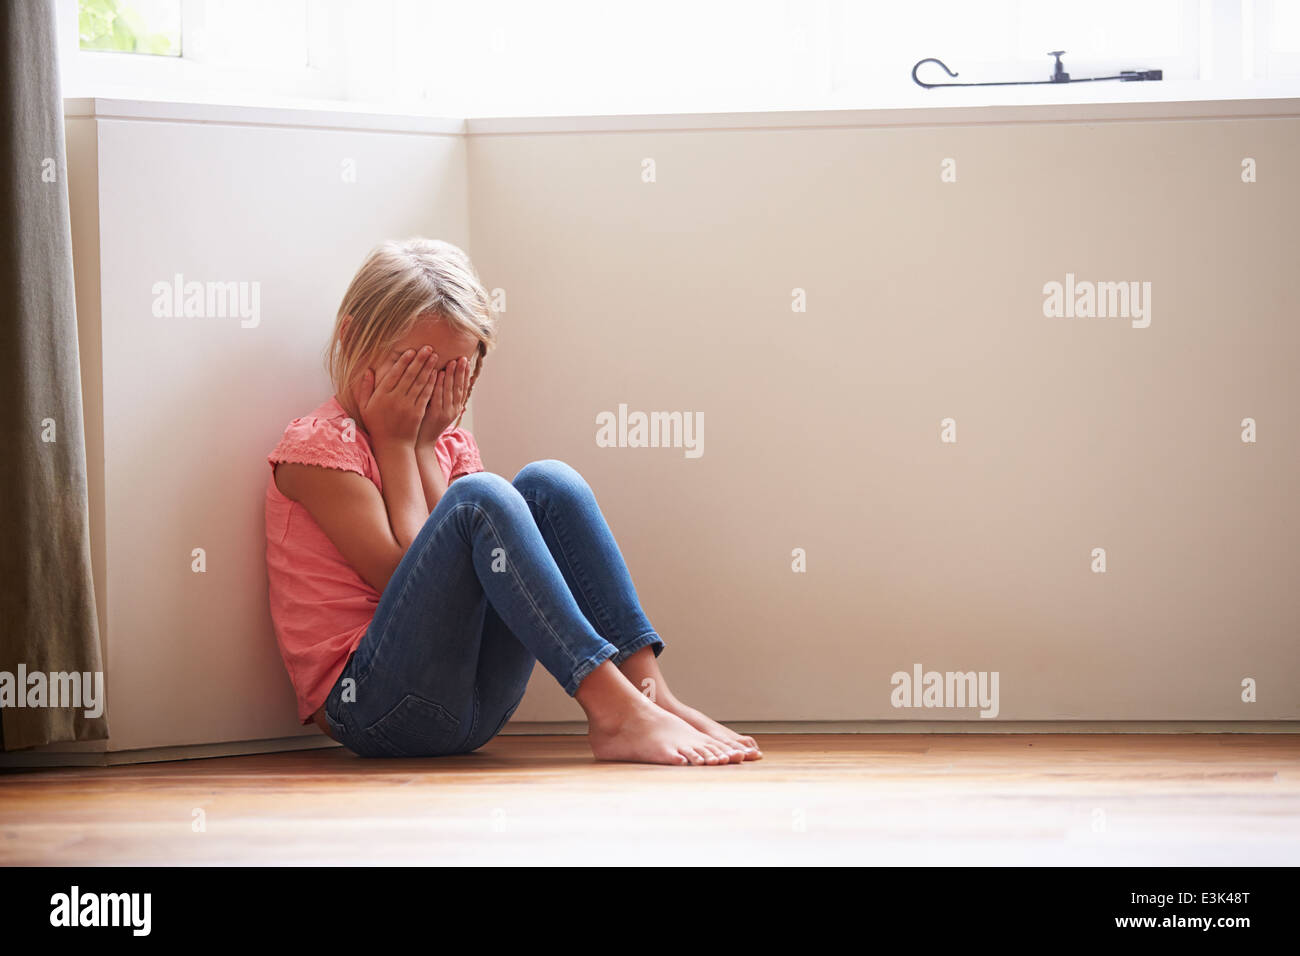 Unhappy Child Sitting On Floor In Corner At Home Stock Photo